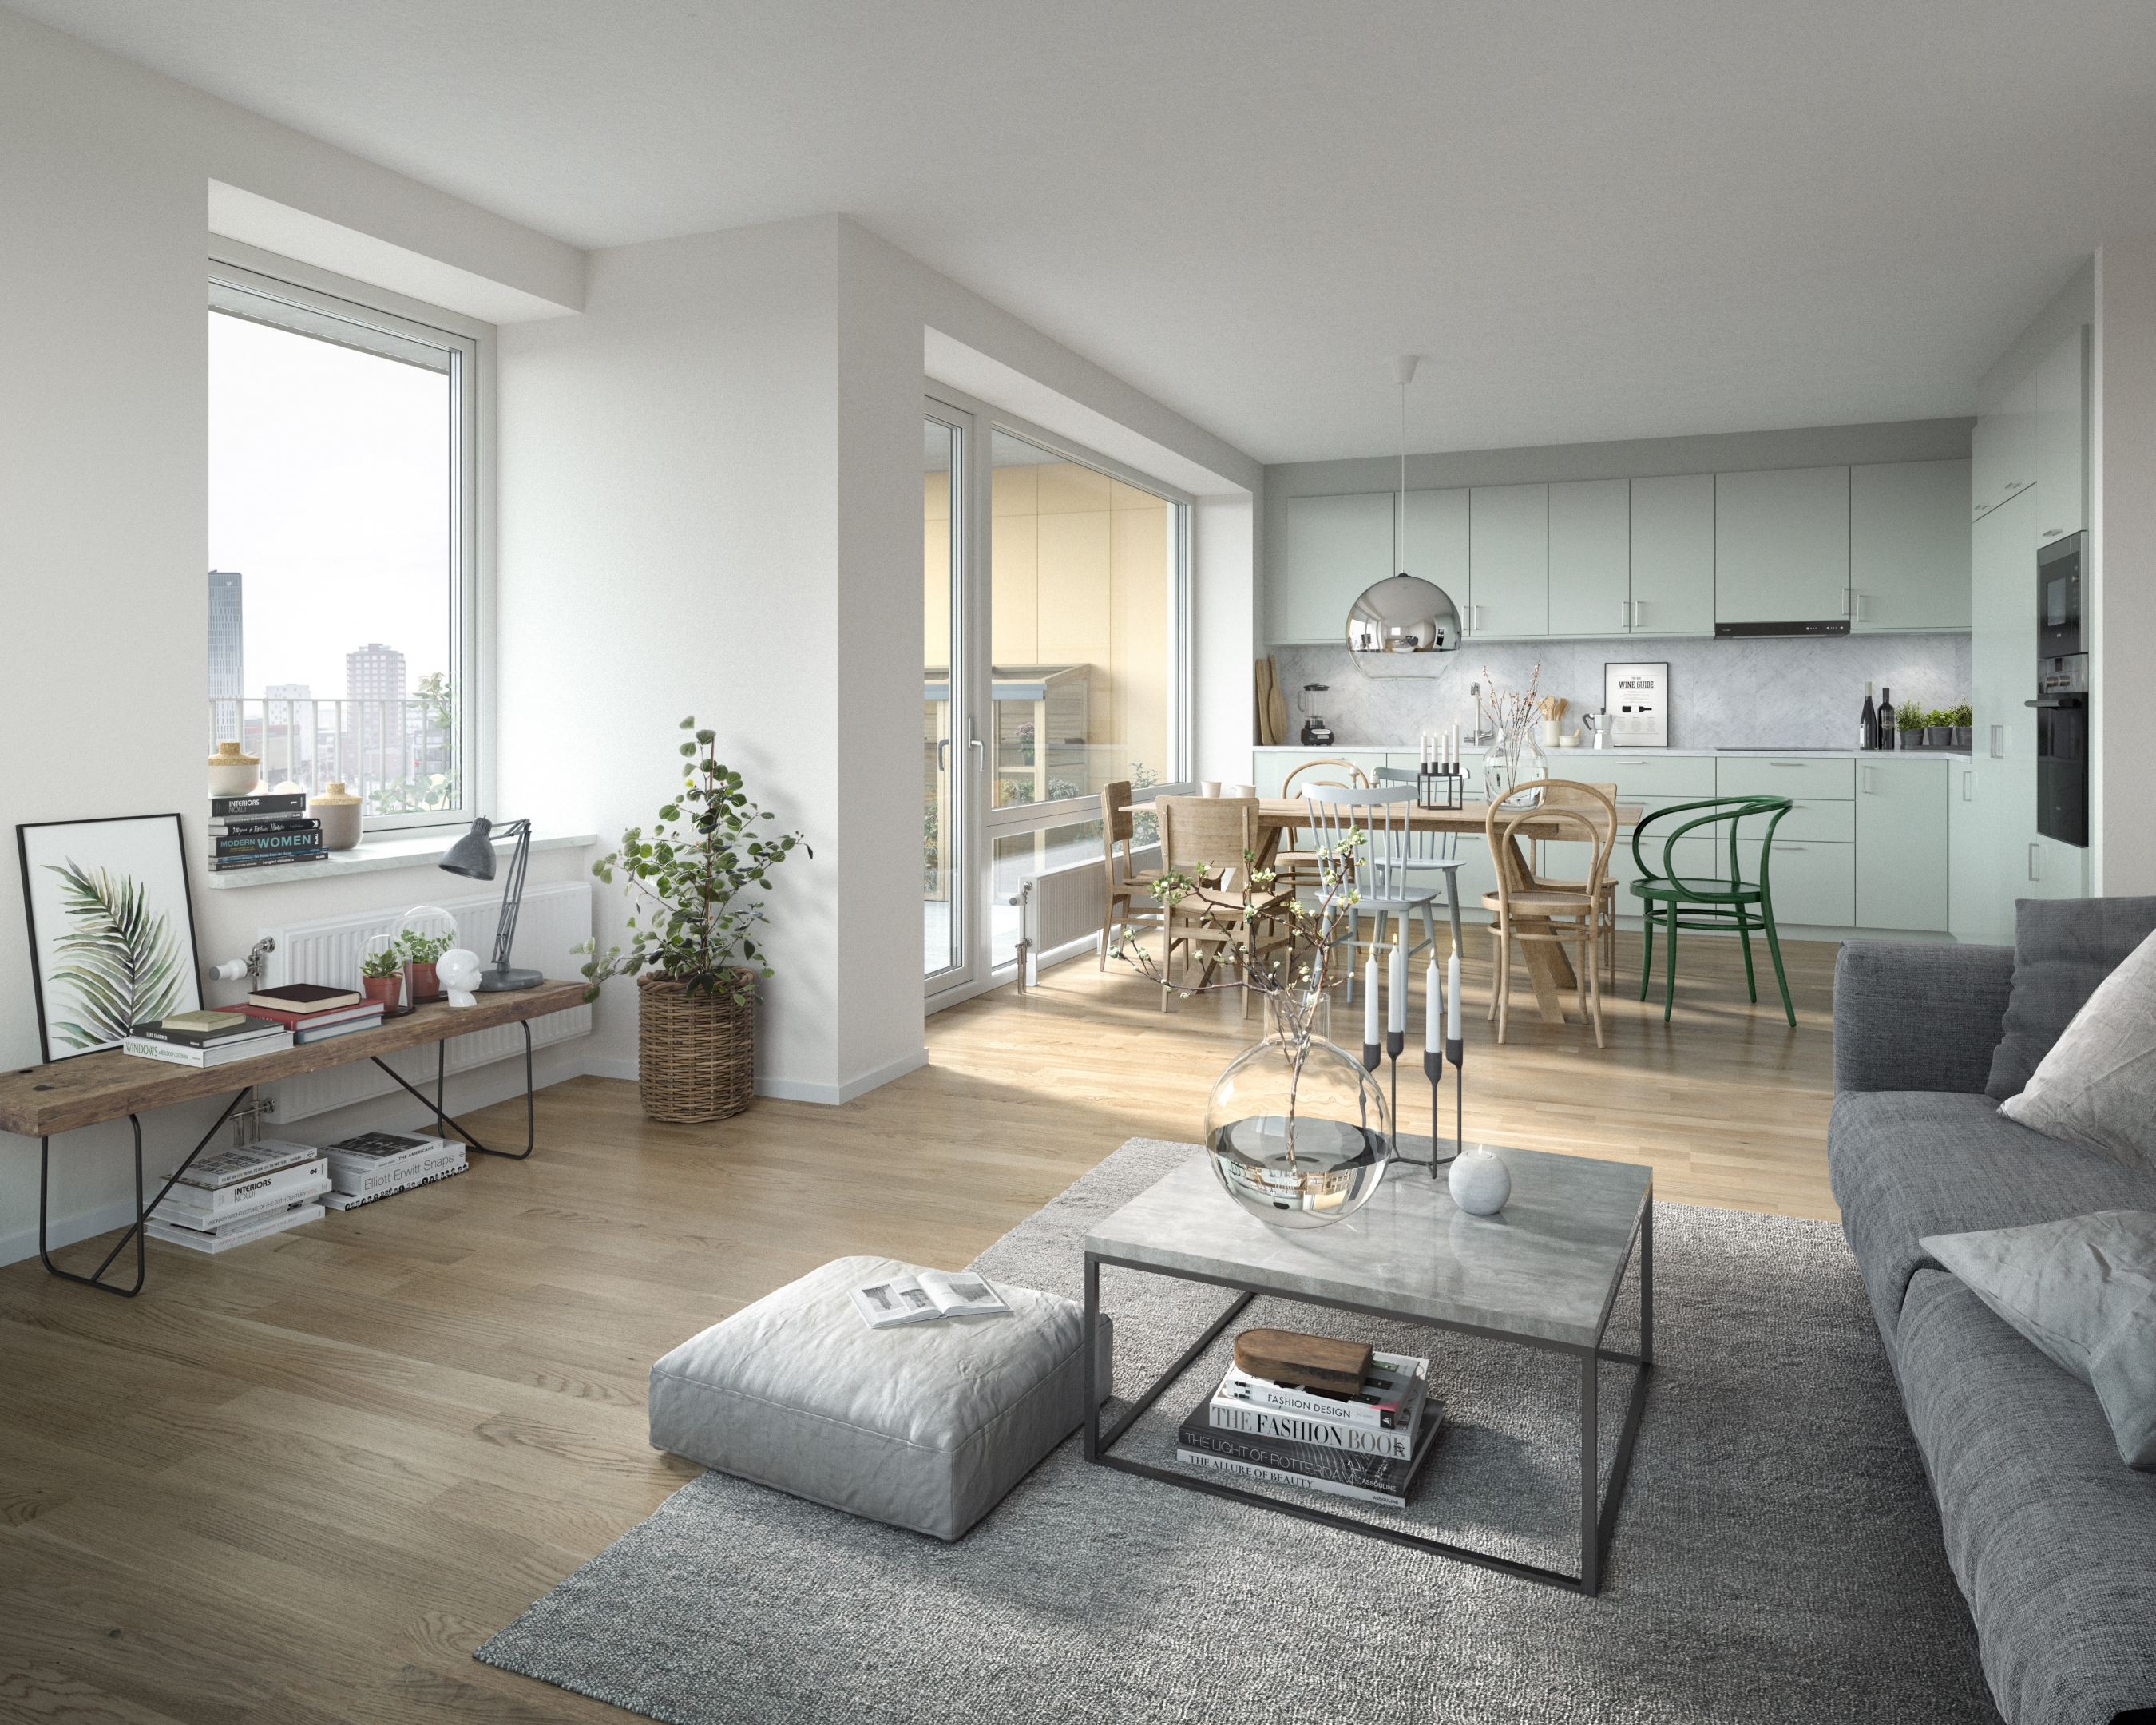 Architectural visualization of Malmo Living for Veidekke. A image of the interior of a residential building in daylight. A livingroom connected with a kitchen.